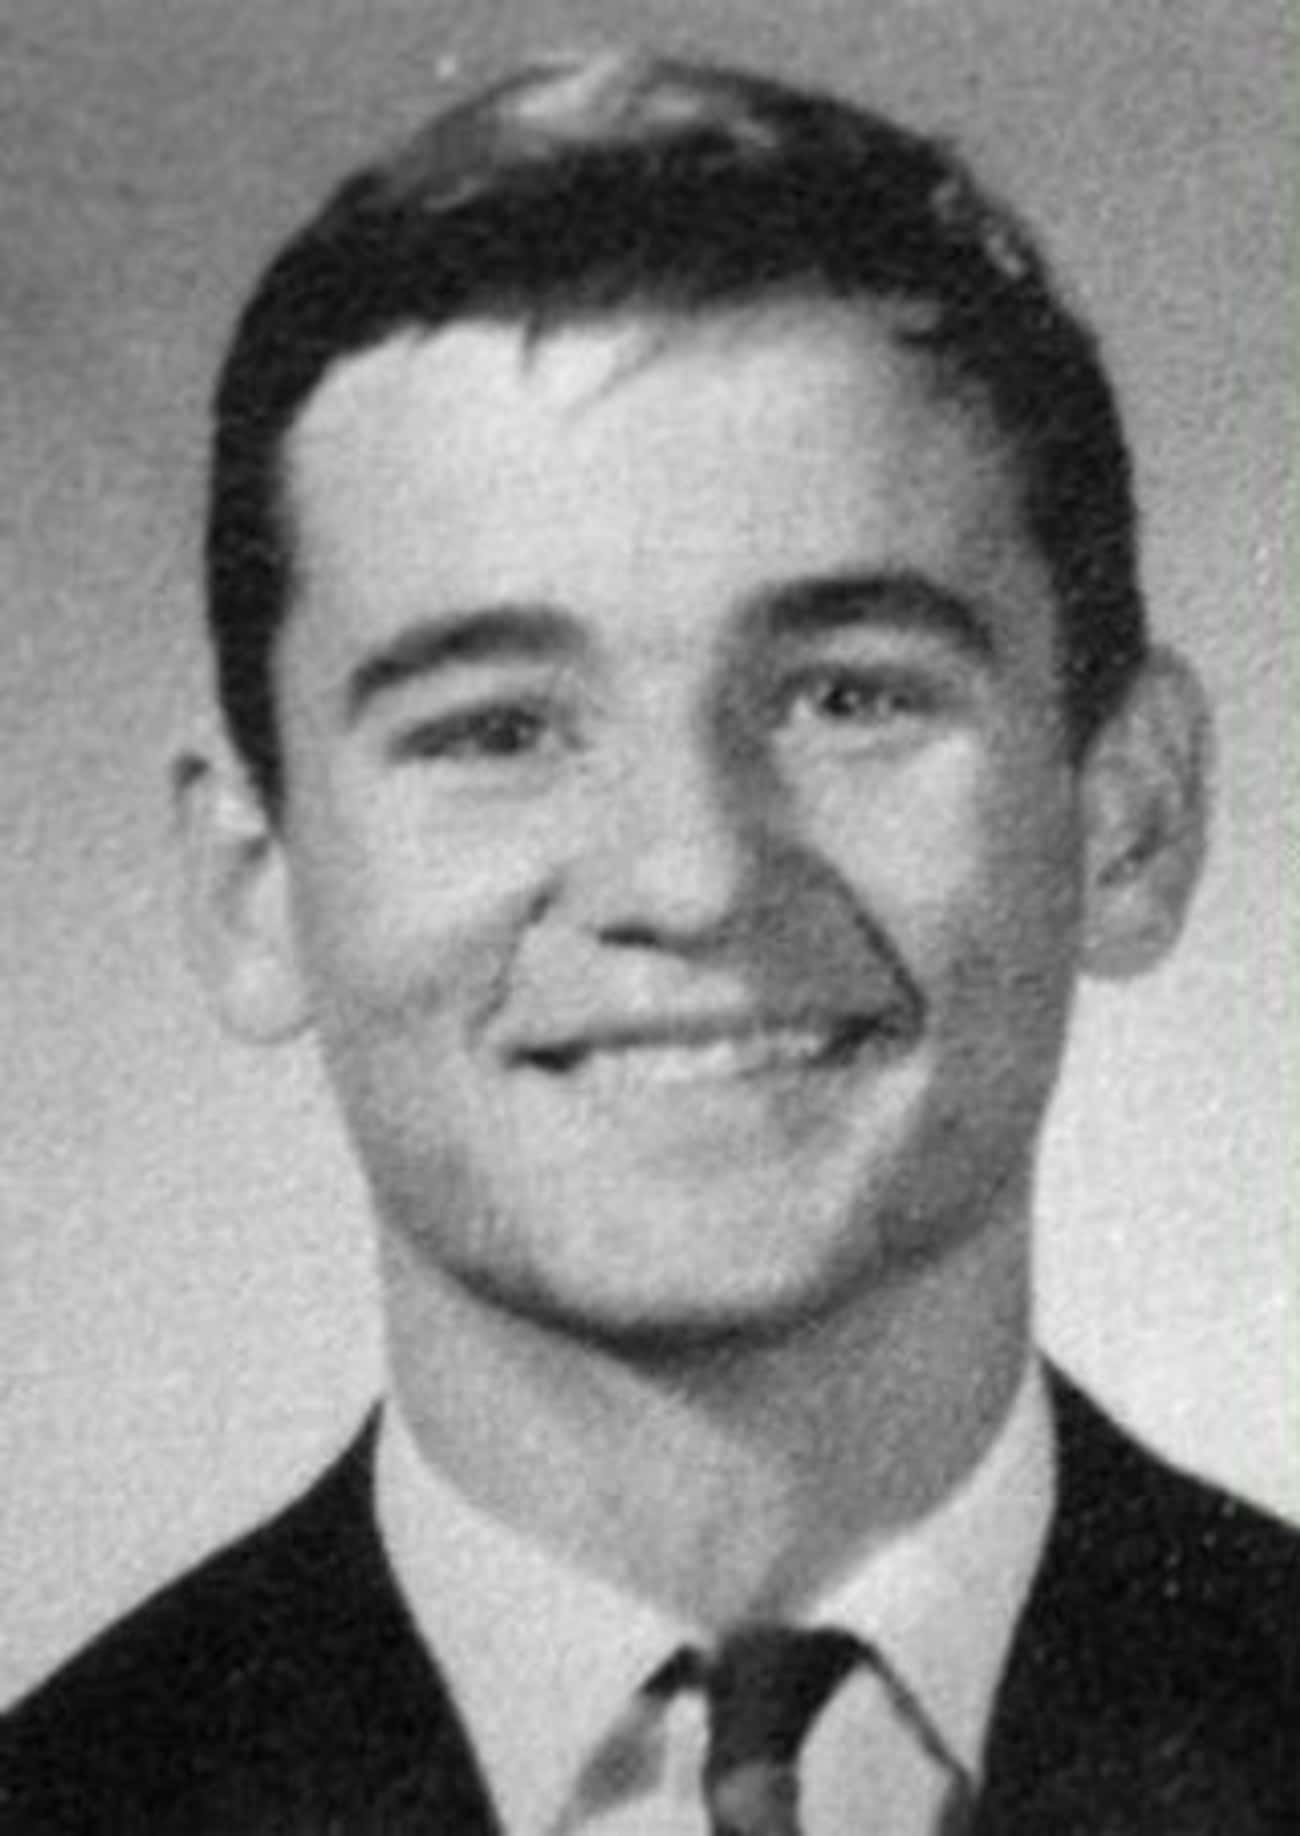 Young Bill Murray in a Suit and Tie